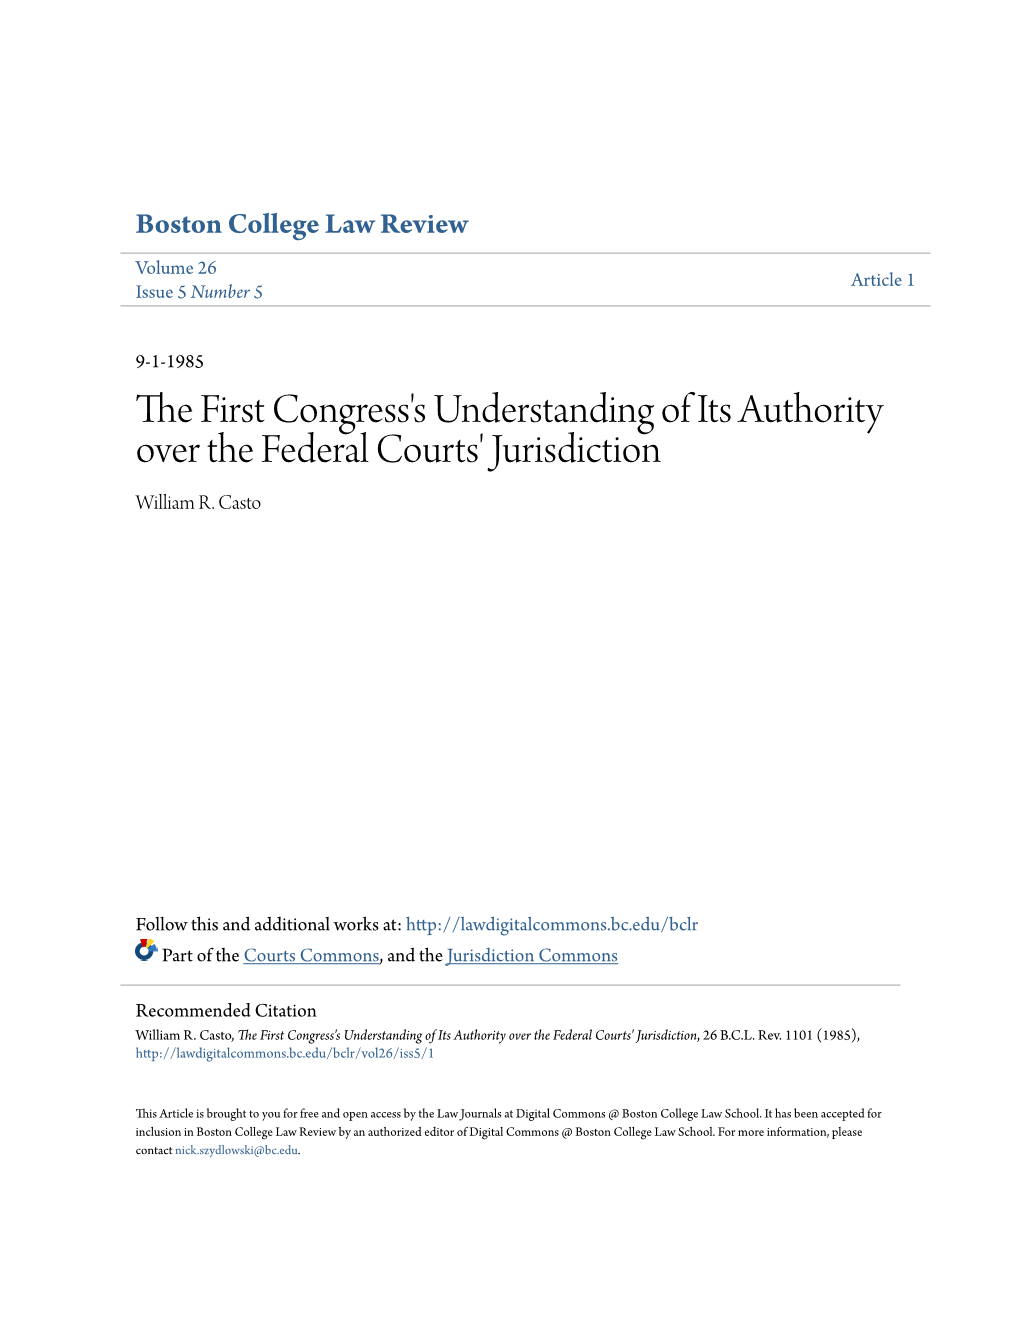 The First Congress's Understanding of Its Authority Over the Federal Courts' Jurisdiction, 26 B.C.L